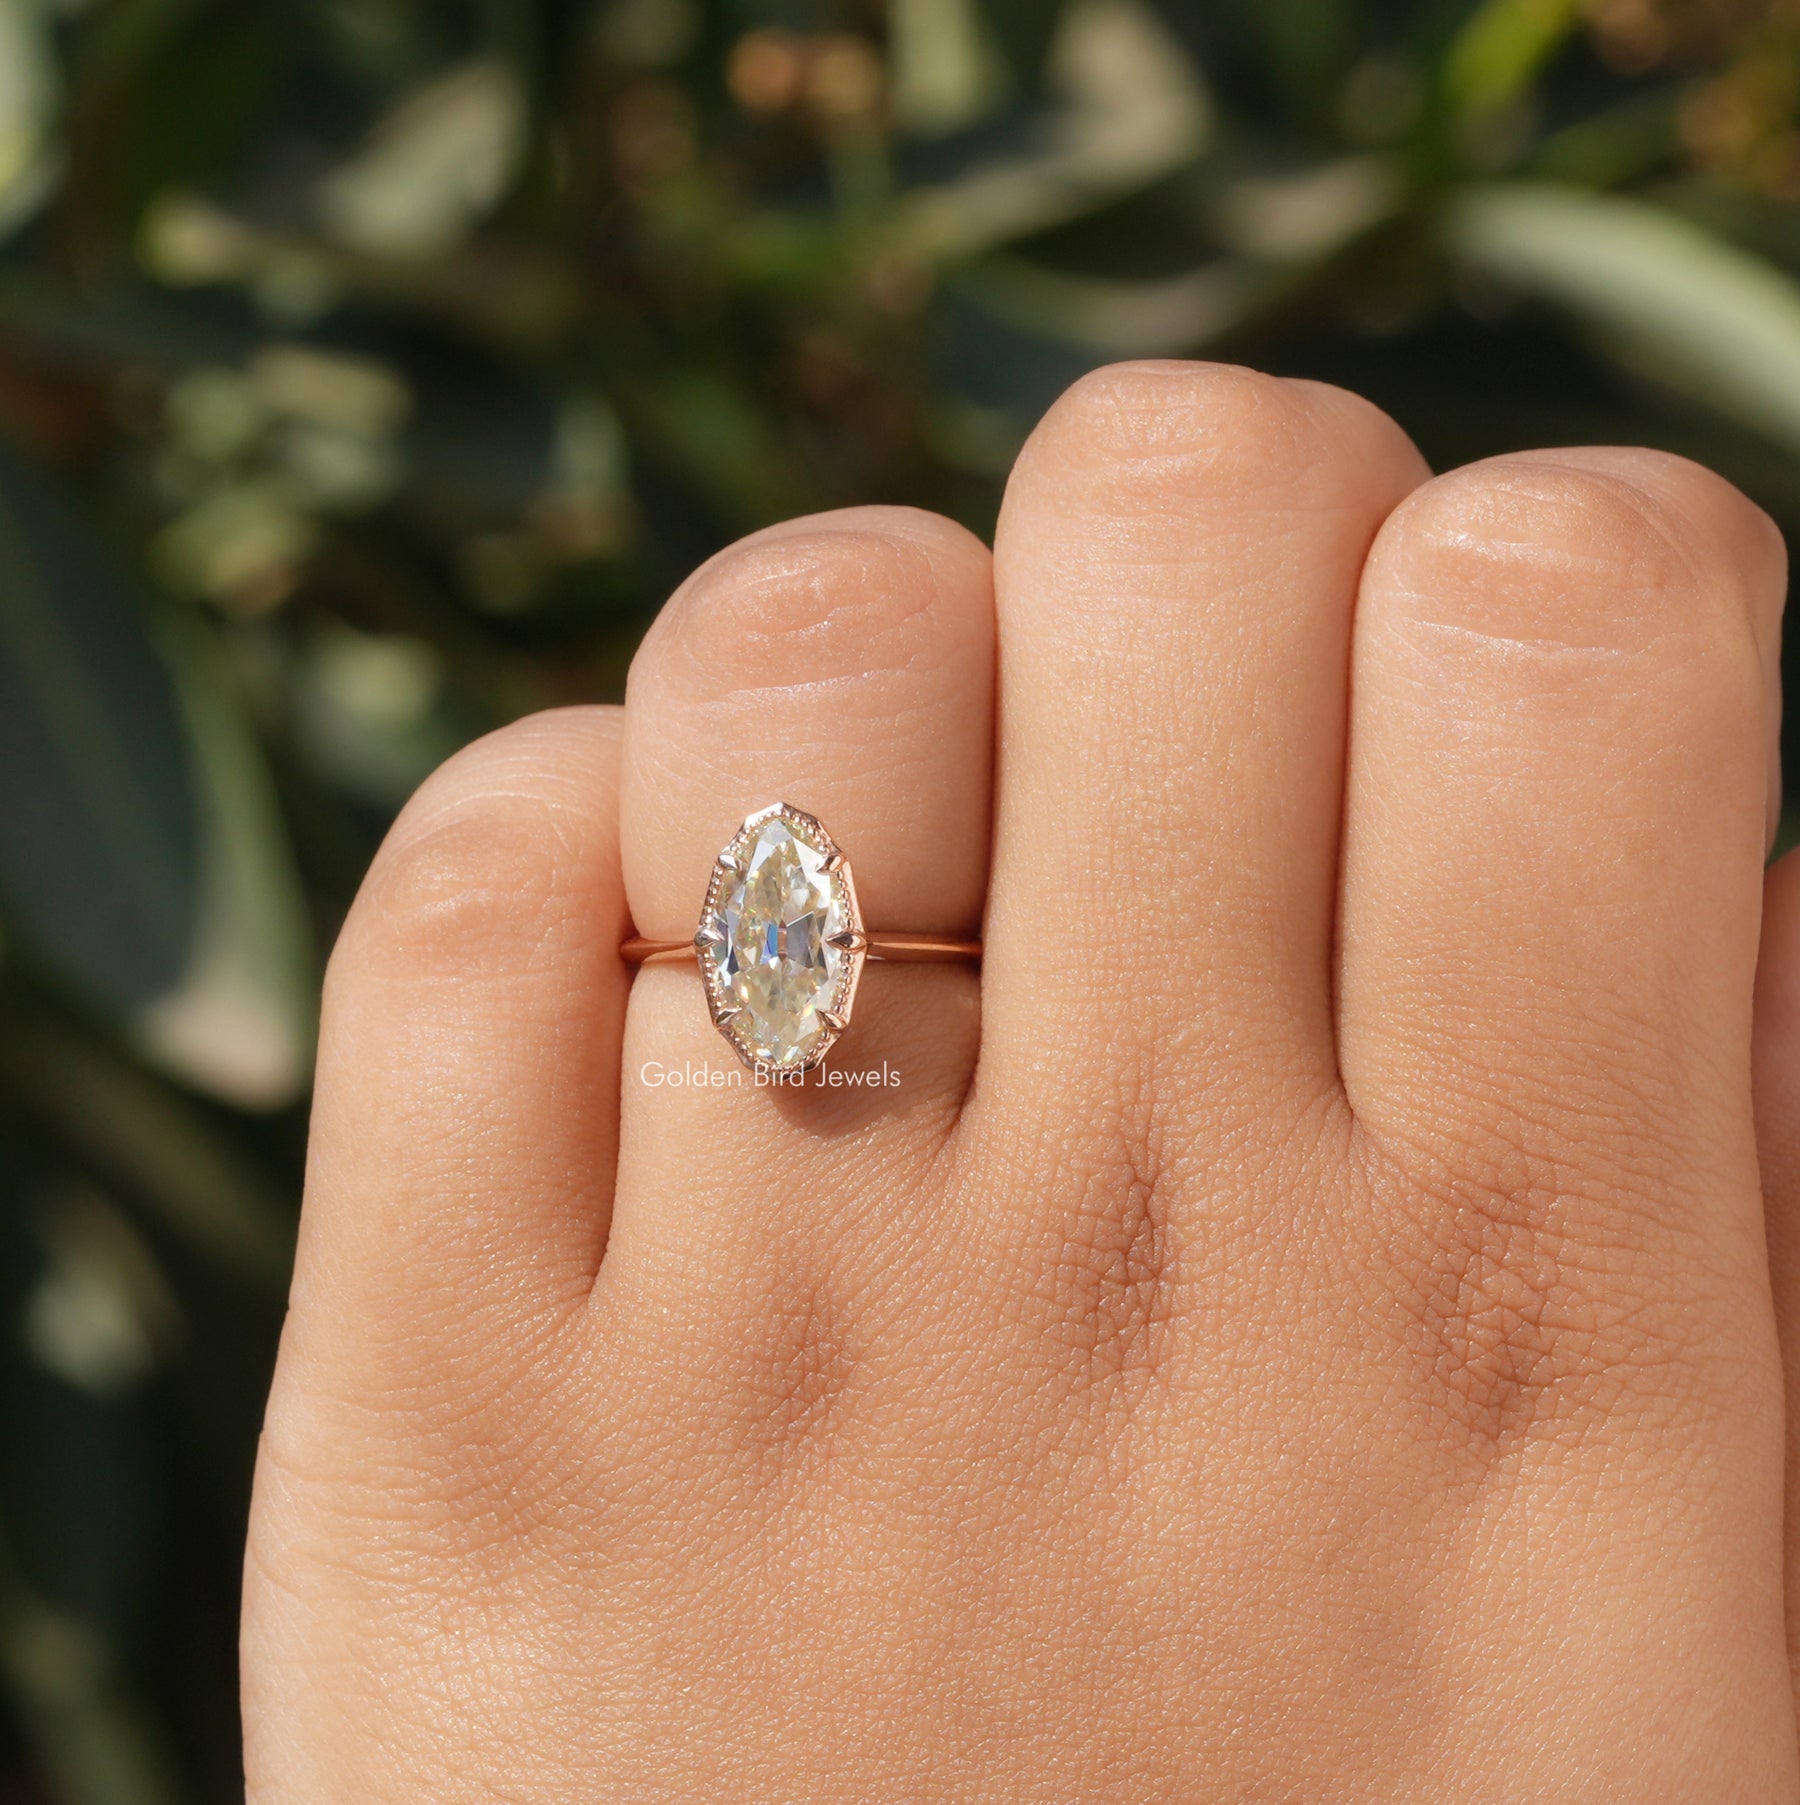 [Prong Setting Moval Cut Moissanite Solitaire Ring In 14k Yellow Gold]-[Golden Bird Jewels]